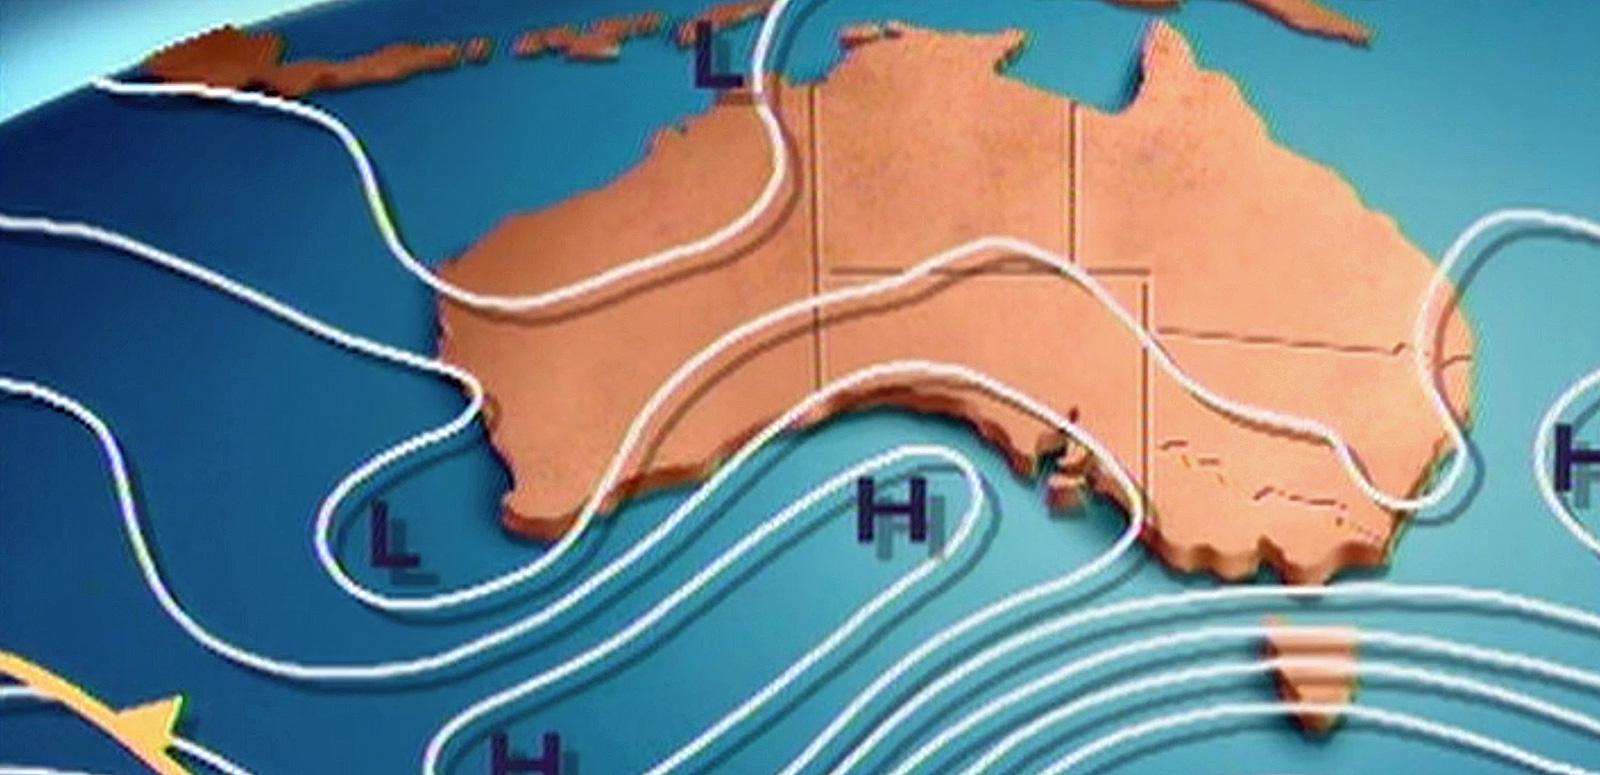 A weather map of Australia which has wavy lines and markers through it showing weather patterns.